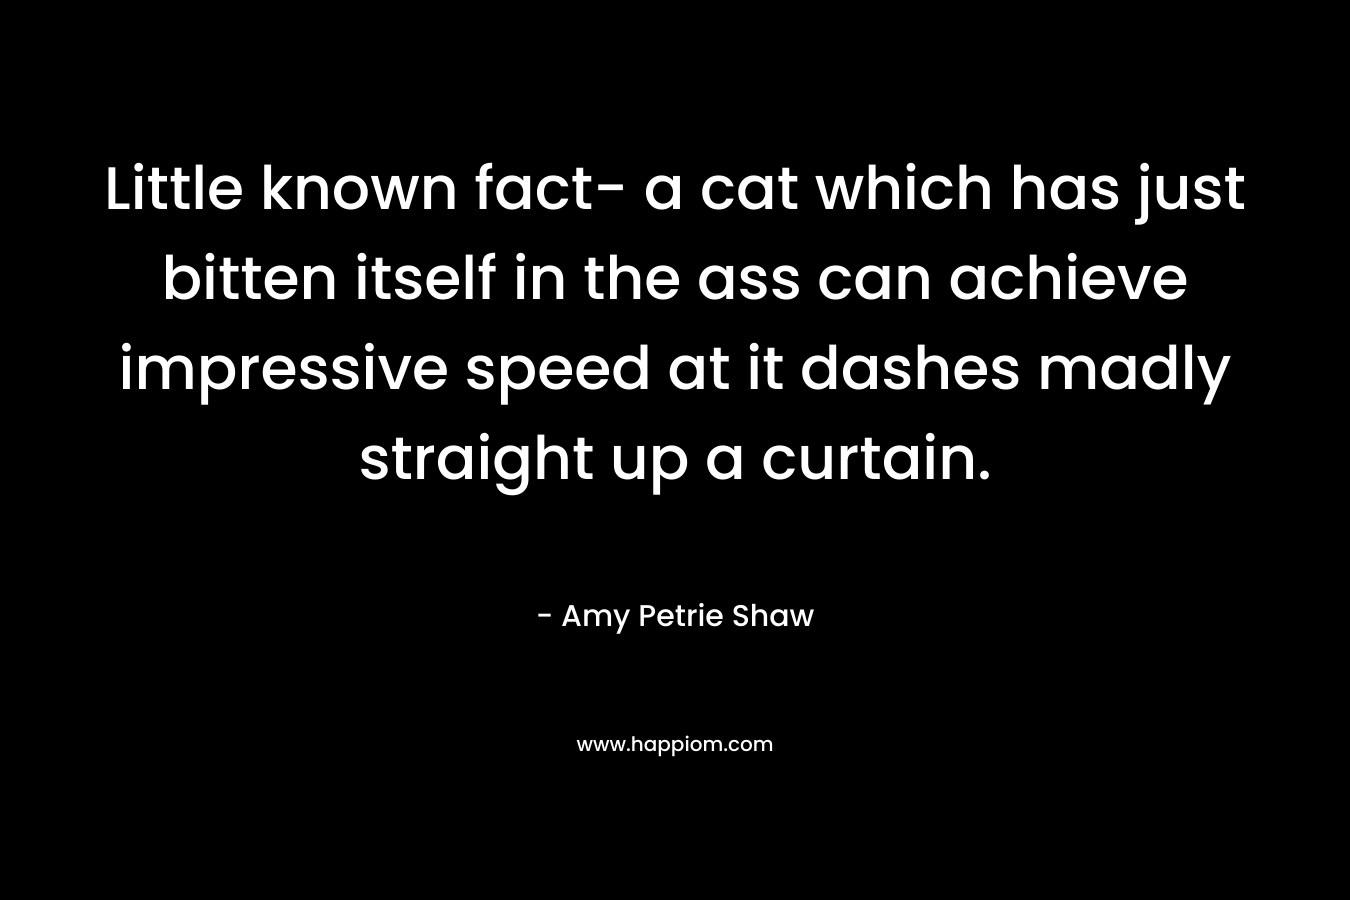 Little known fact- a cat which has just bitten itself in the ass can achieve impressive speed at it dashes madly straight up a curtain. – Amy Petrie Shaw